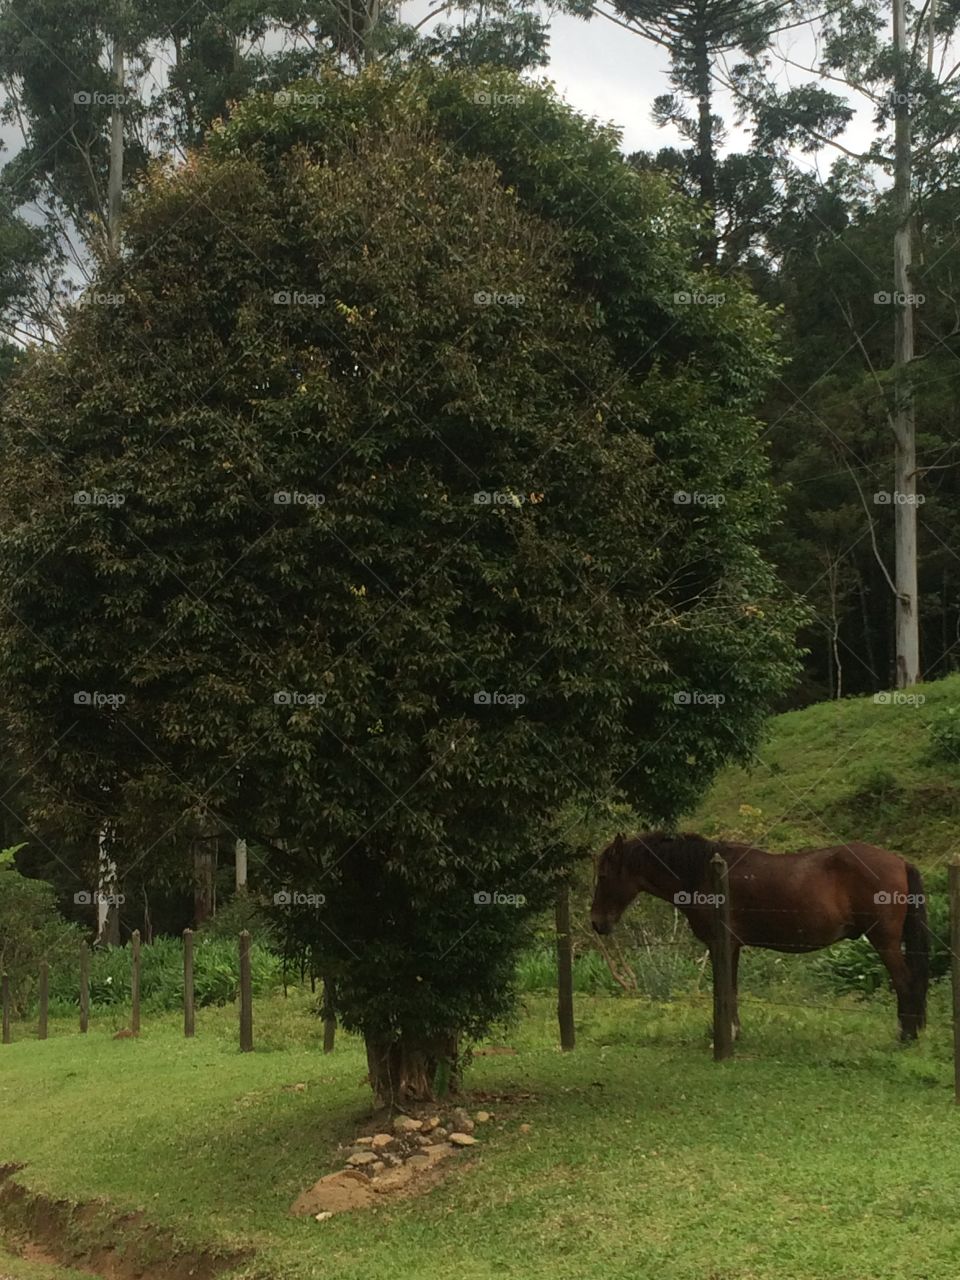 Horse and the tree